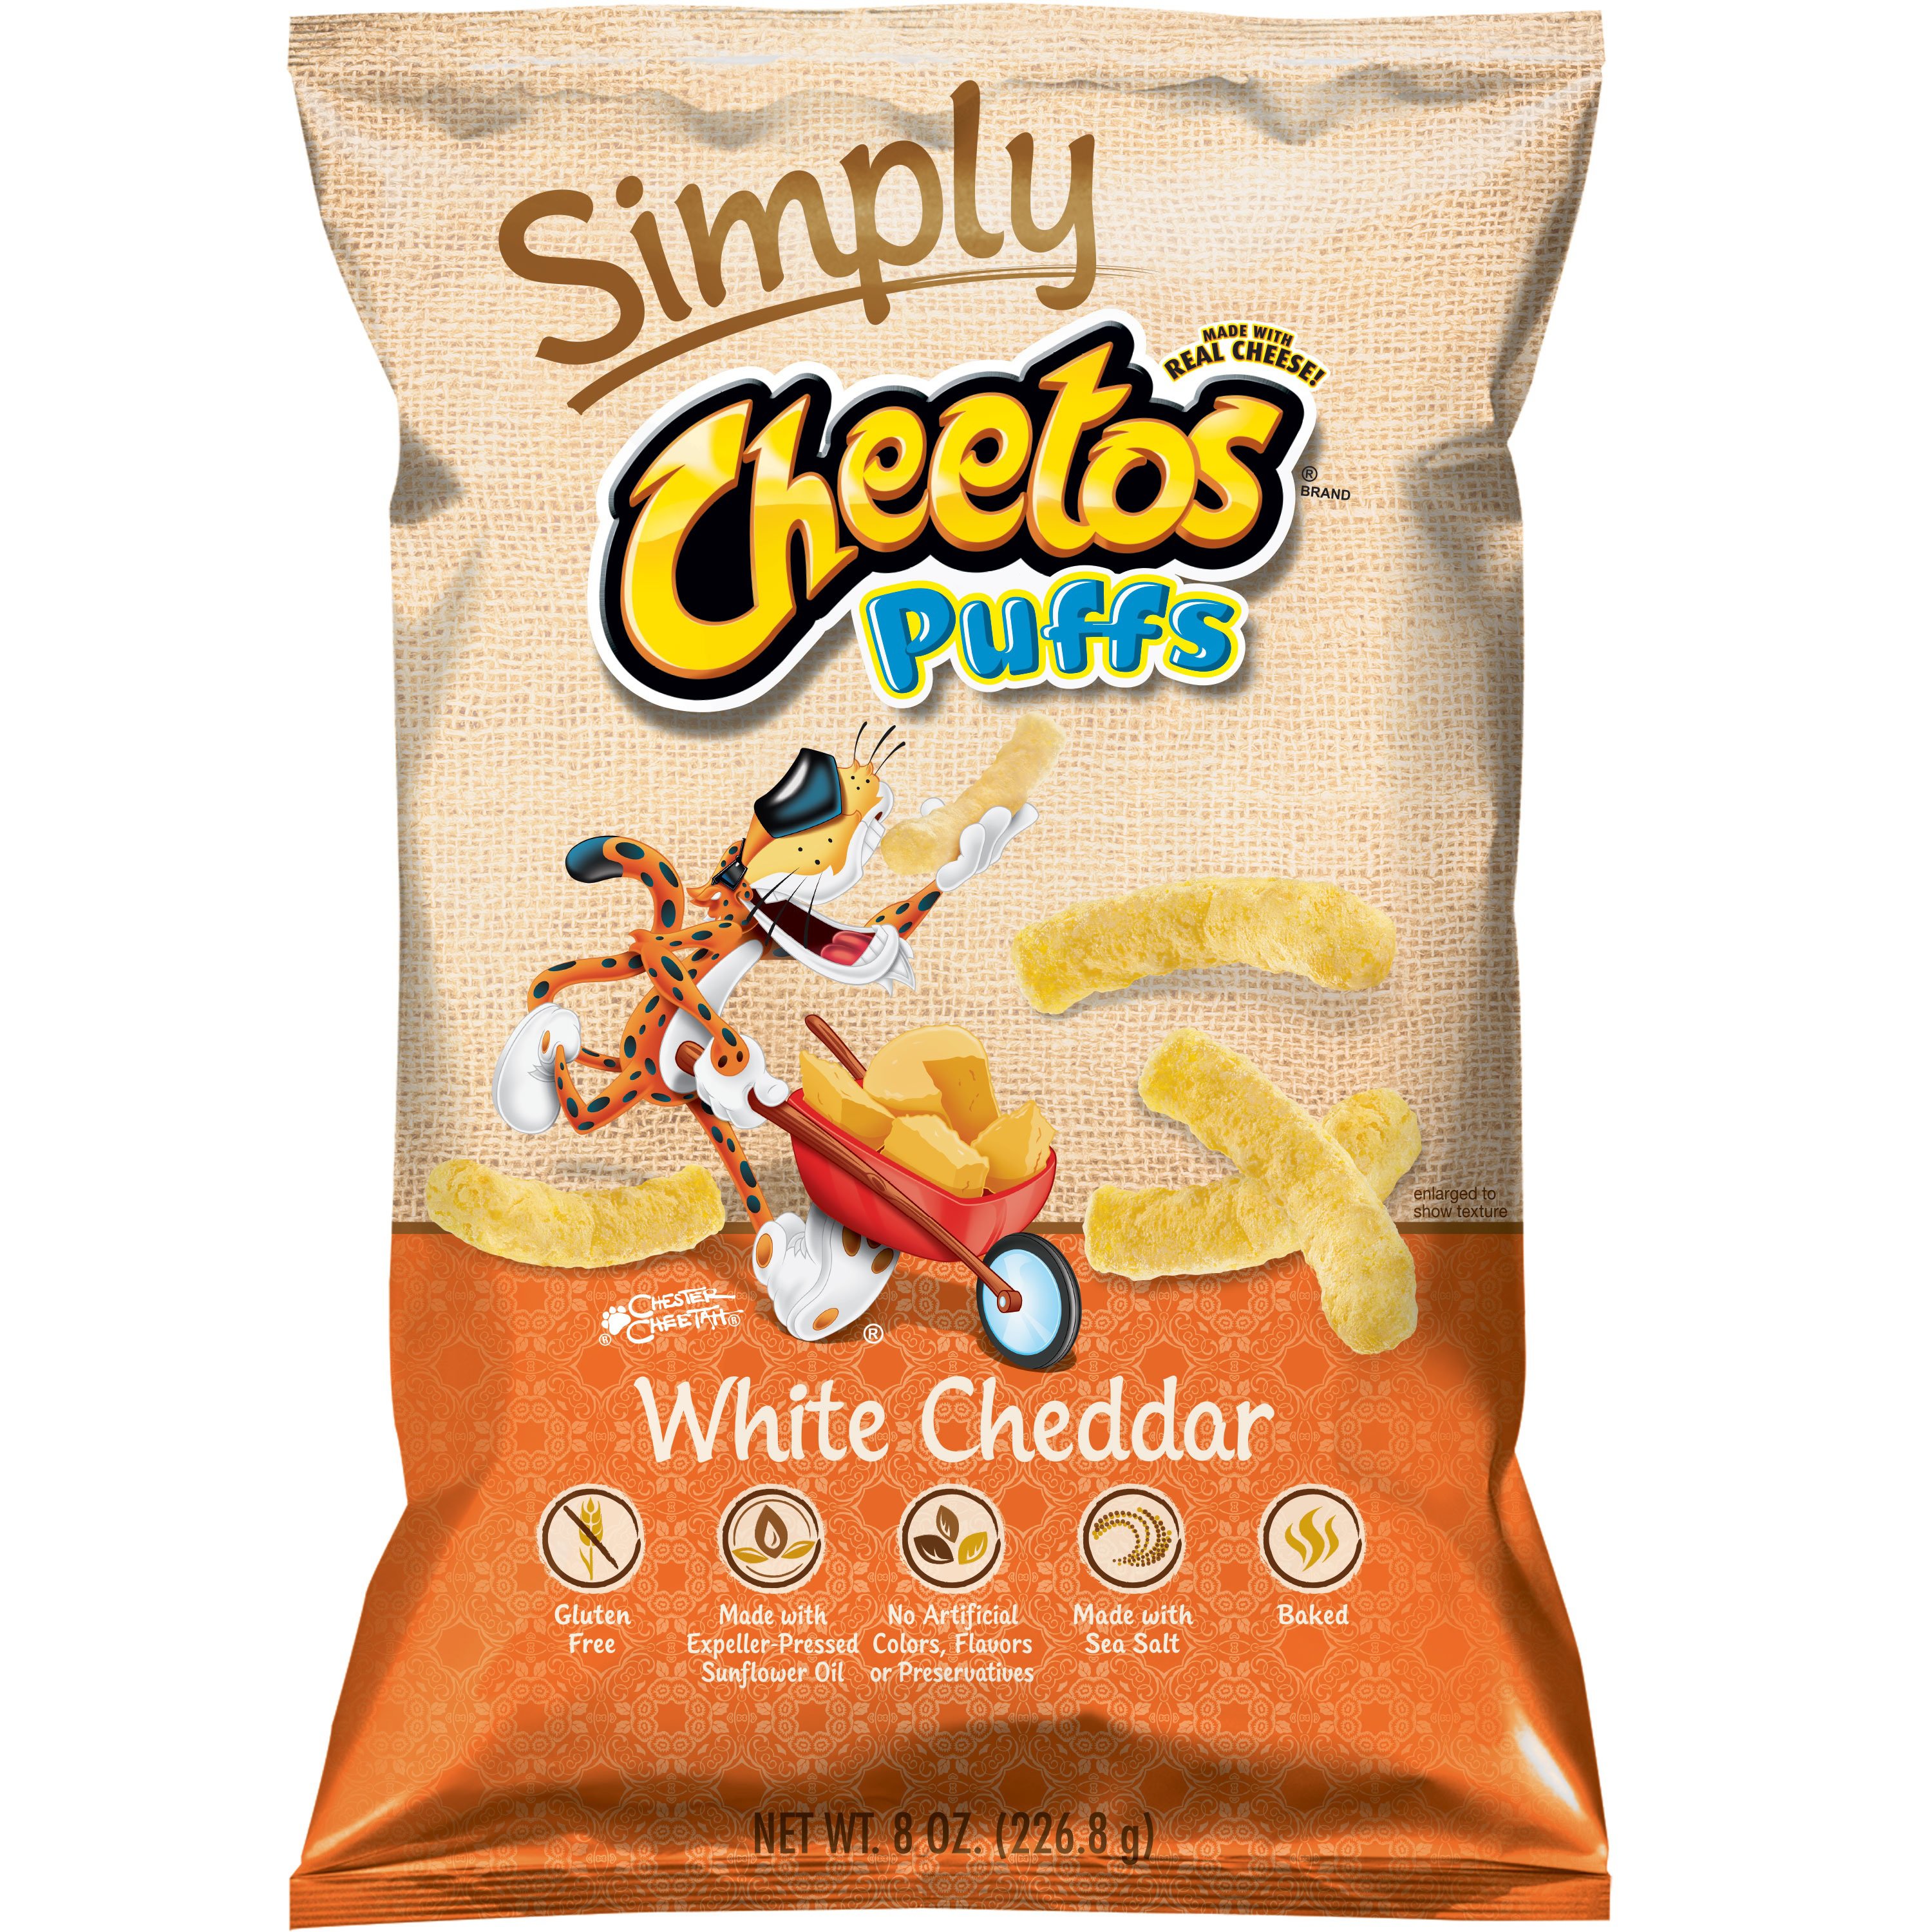 Cheetos Puffs Simply White Cheddar Cheese Snacks